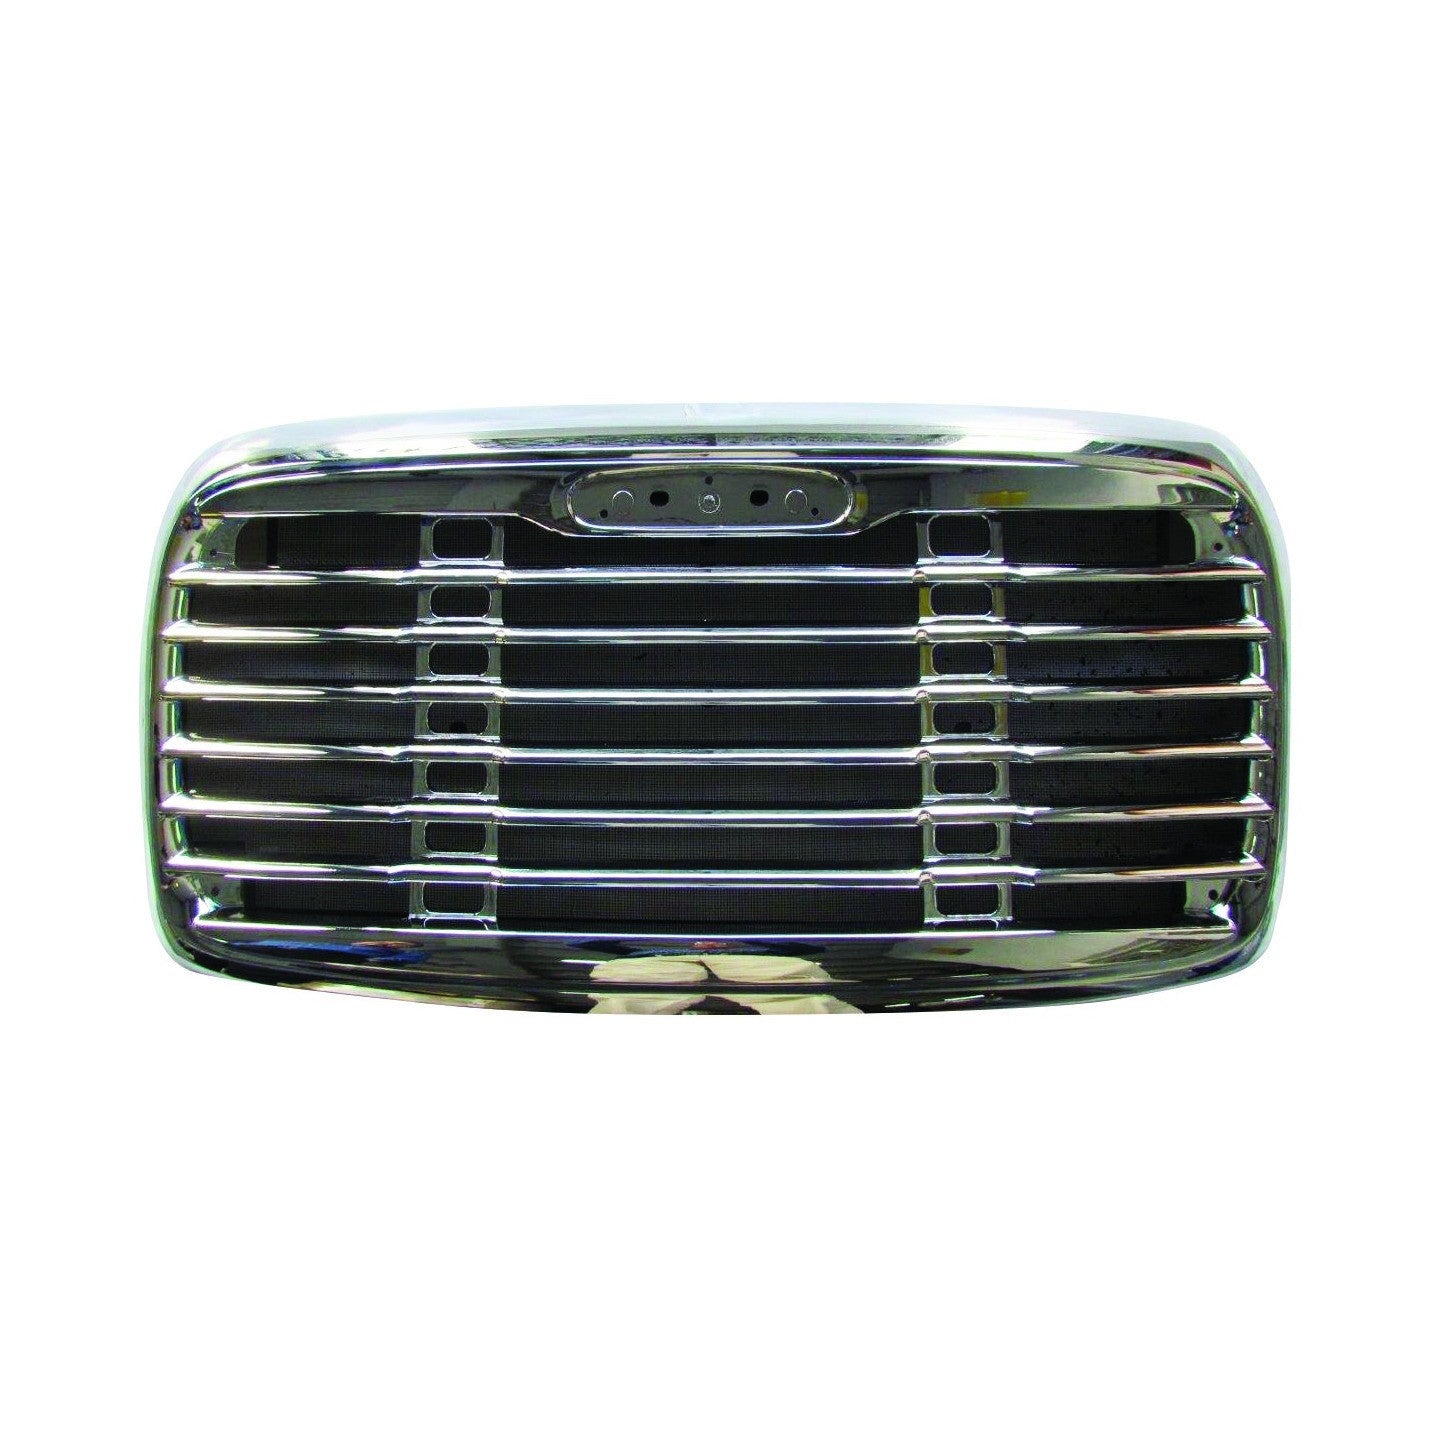 Fortpro Chrome Grille with Bugscreen Compatible with Freightliner Columbia 2000 - 2008 Replaces OEM part: A17-15251-003, A17-15251-00 | F247521